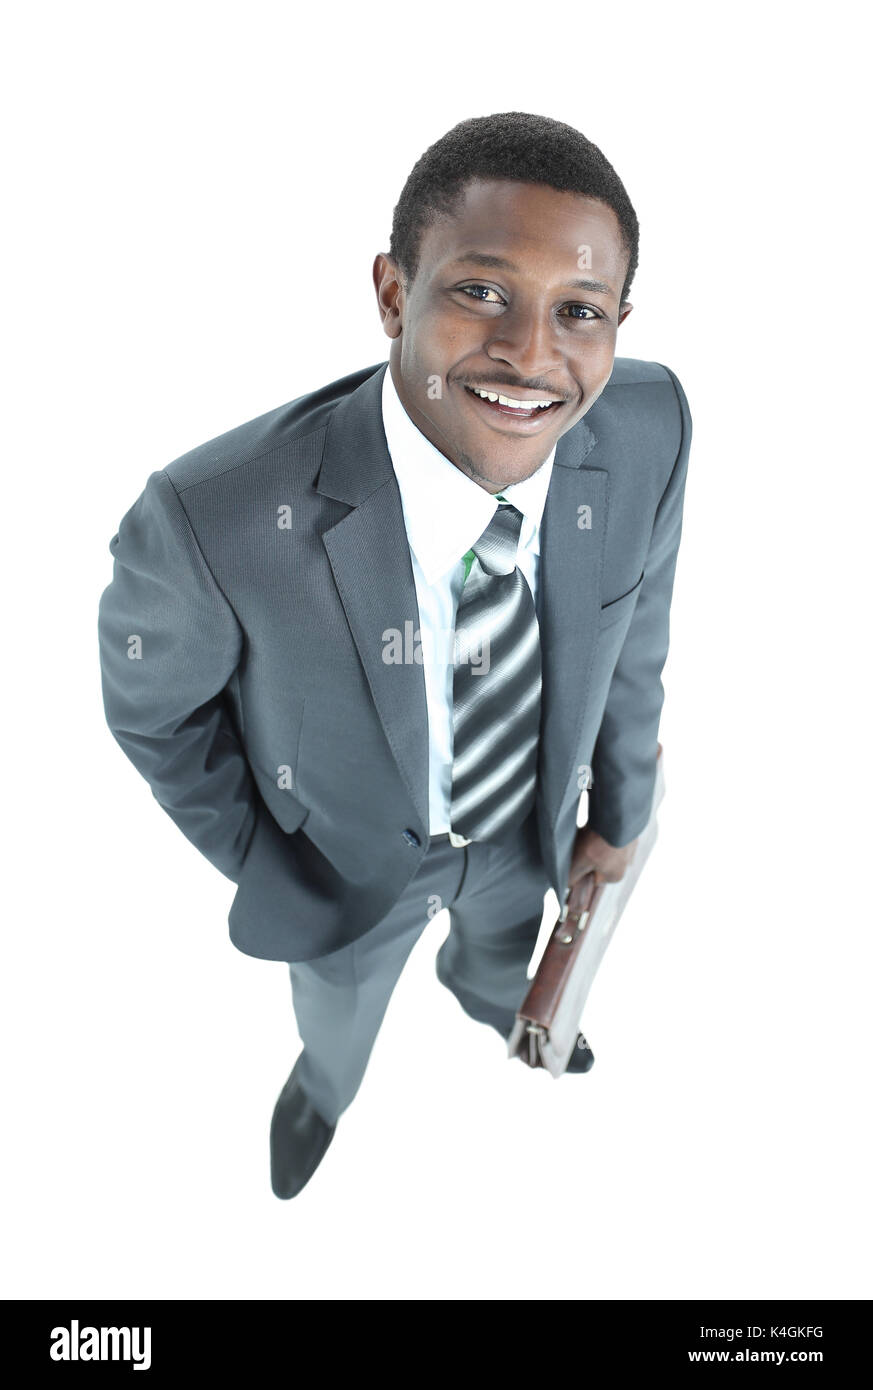 Portrait of young happy smiling business man, Top view. Stock Photo